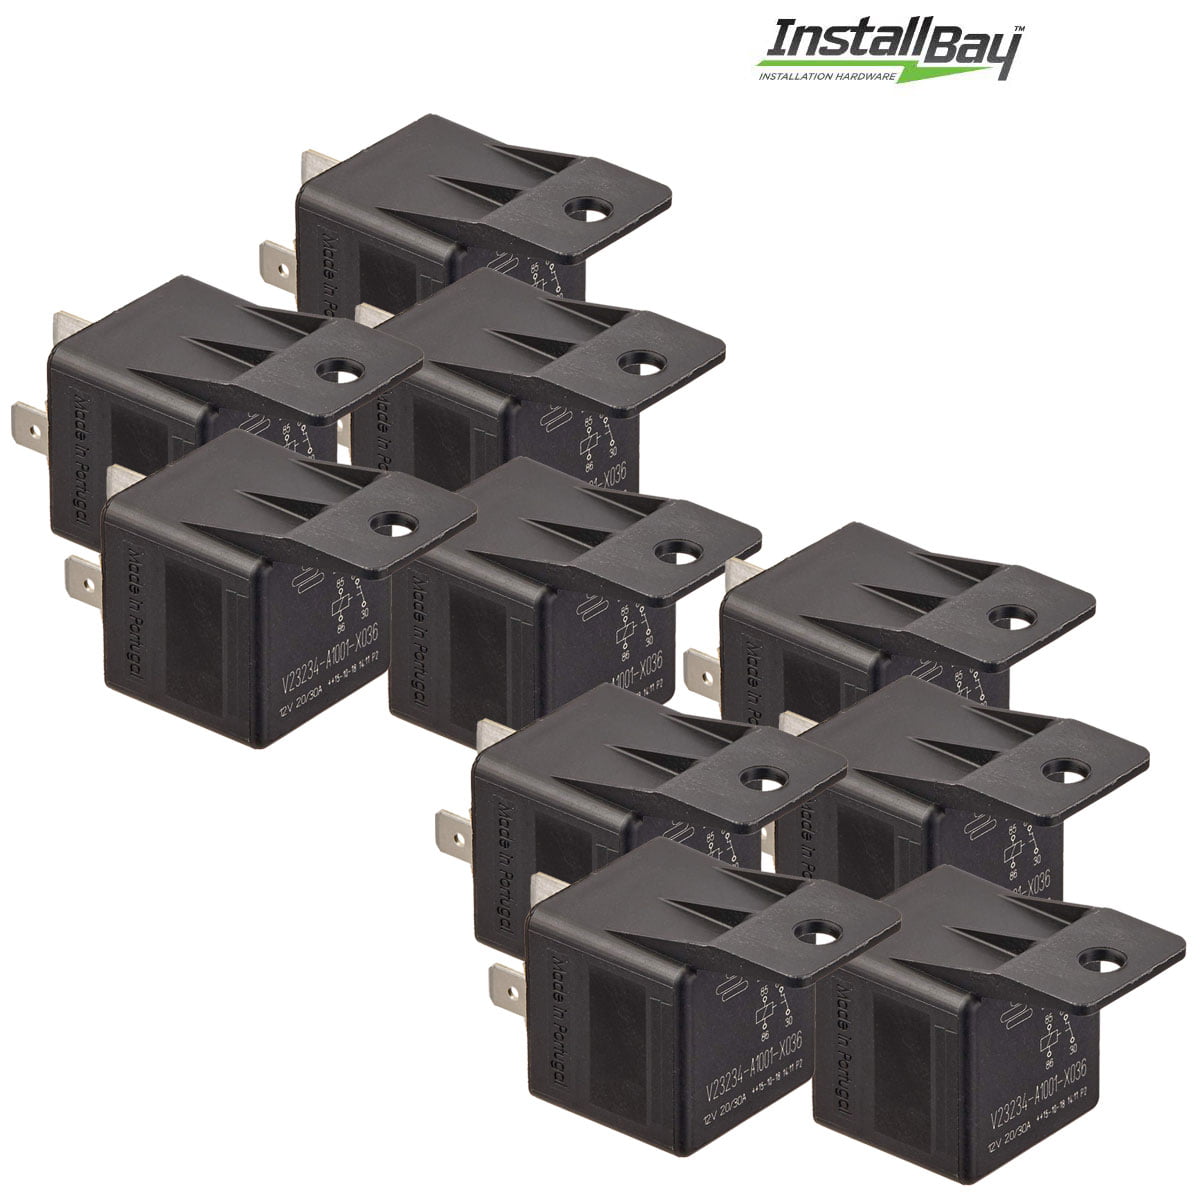 SET OF 10 12v 5pin 20/30 amp On/Off Relays automotive